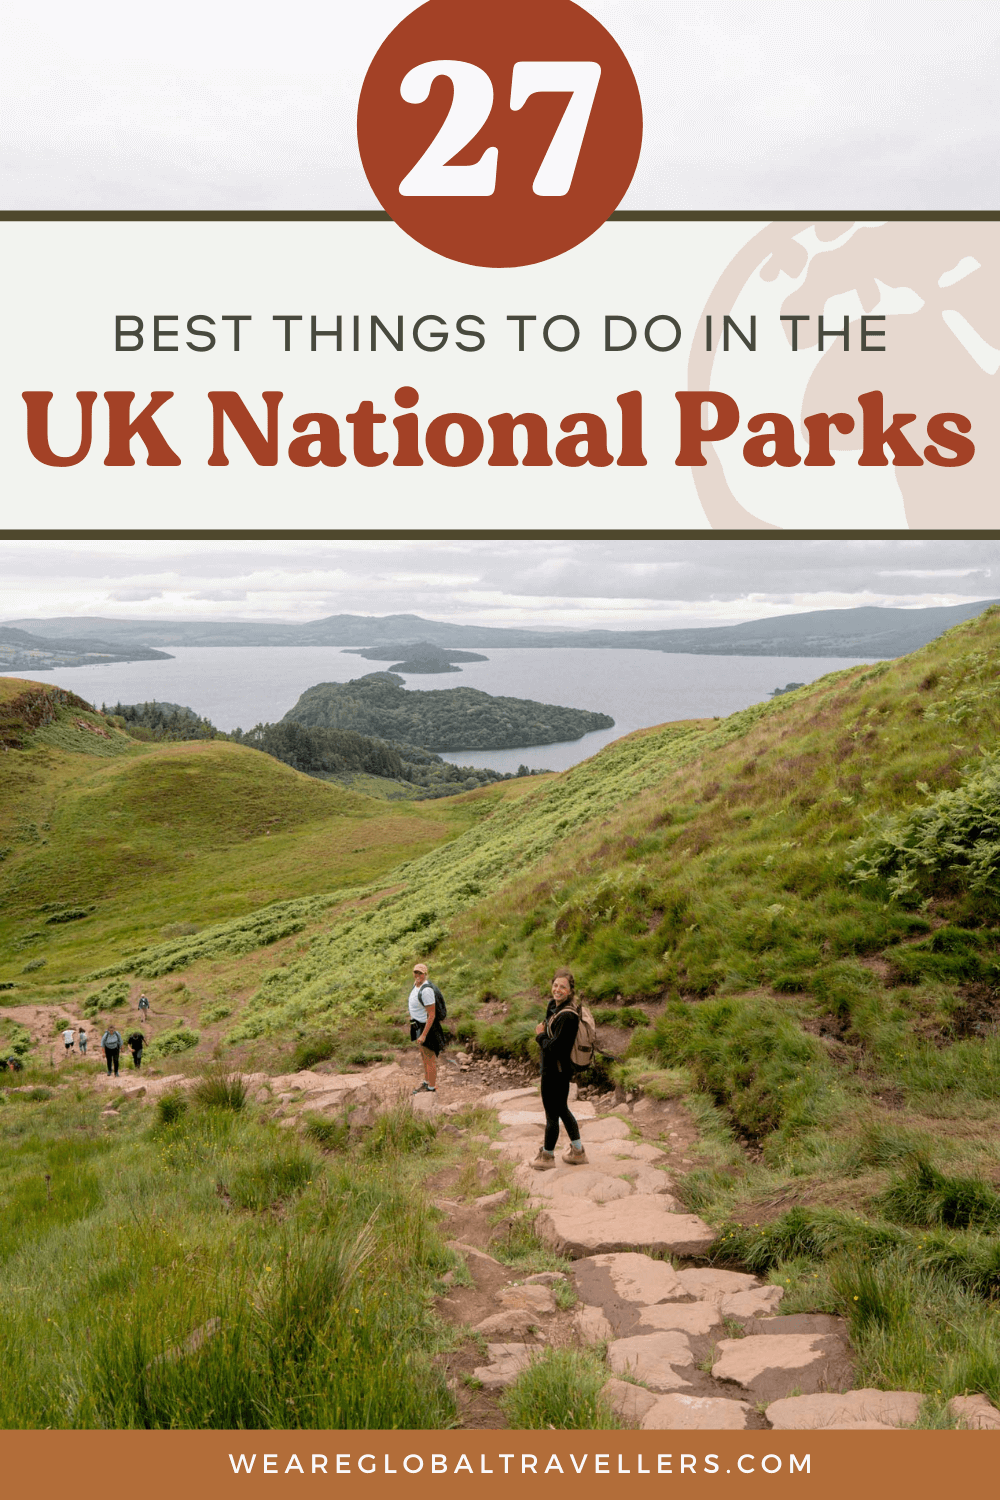 The best things to do in the UK National Parks